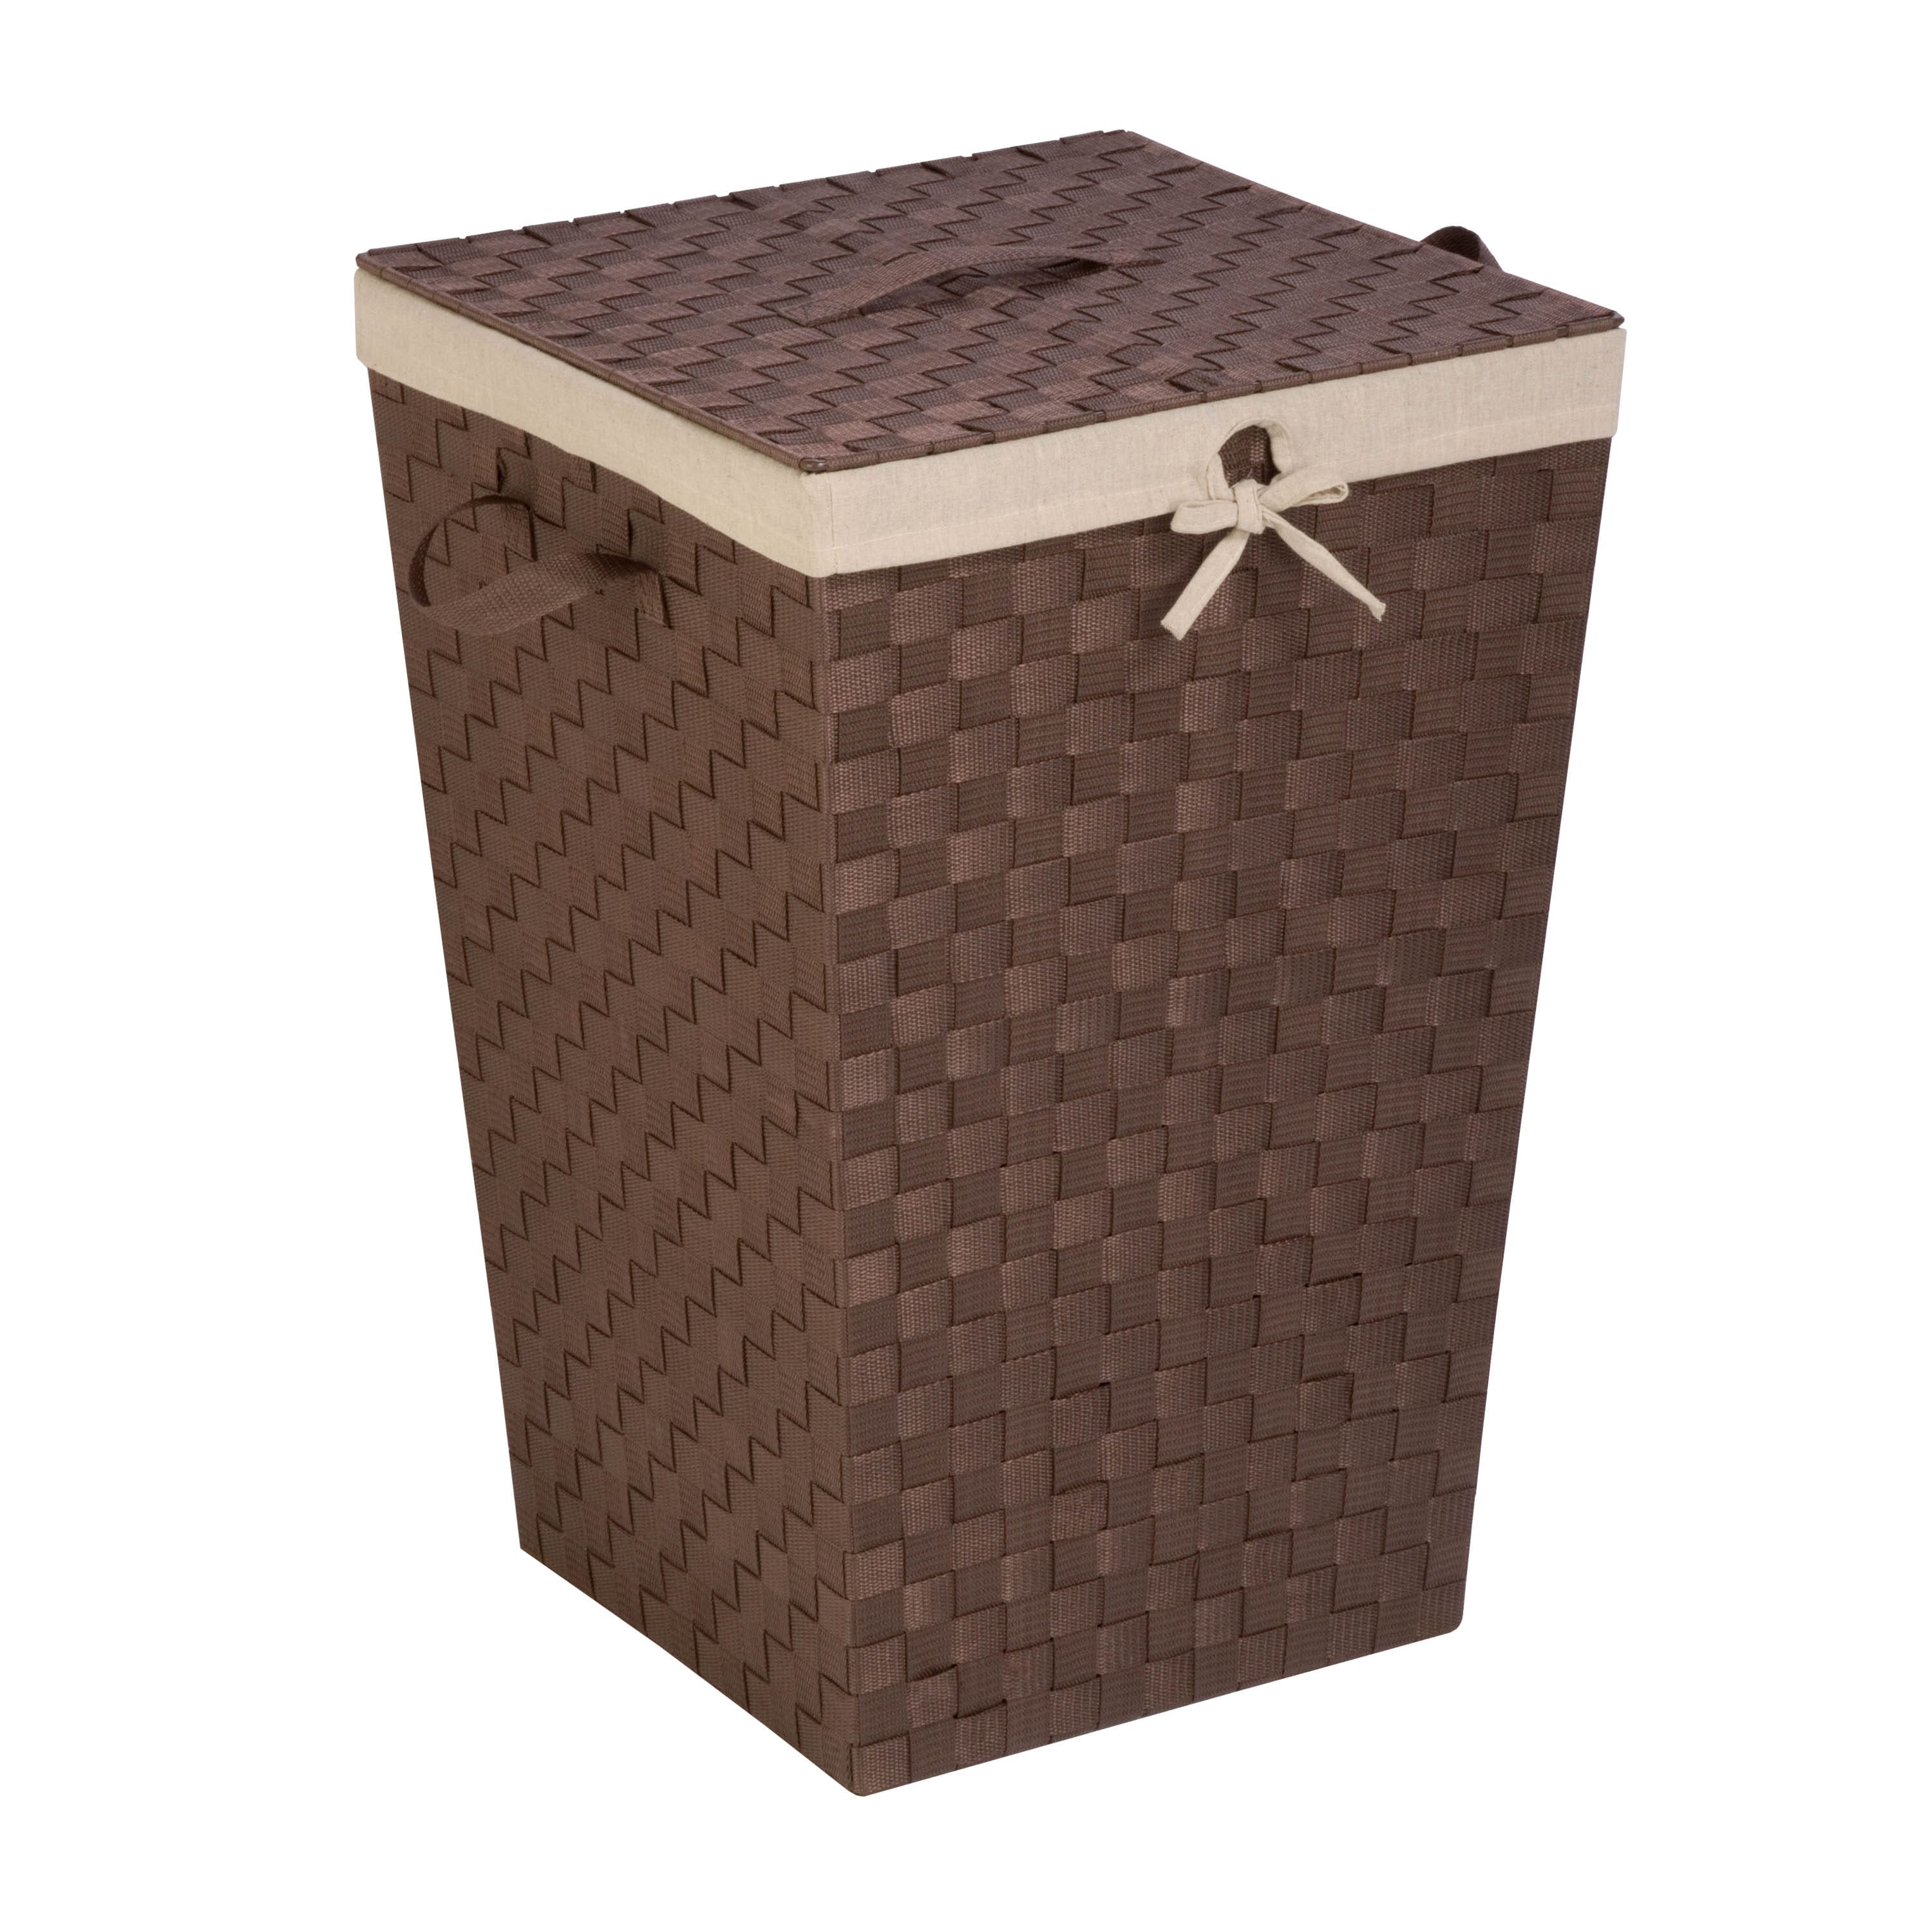 Honey Can Do Java Brown Decorative Woven Hamper with Lid